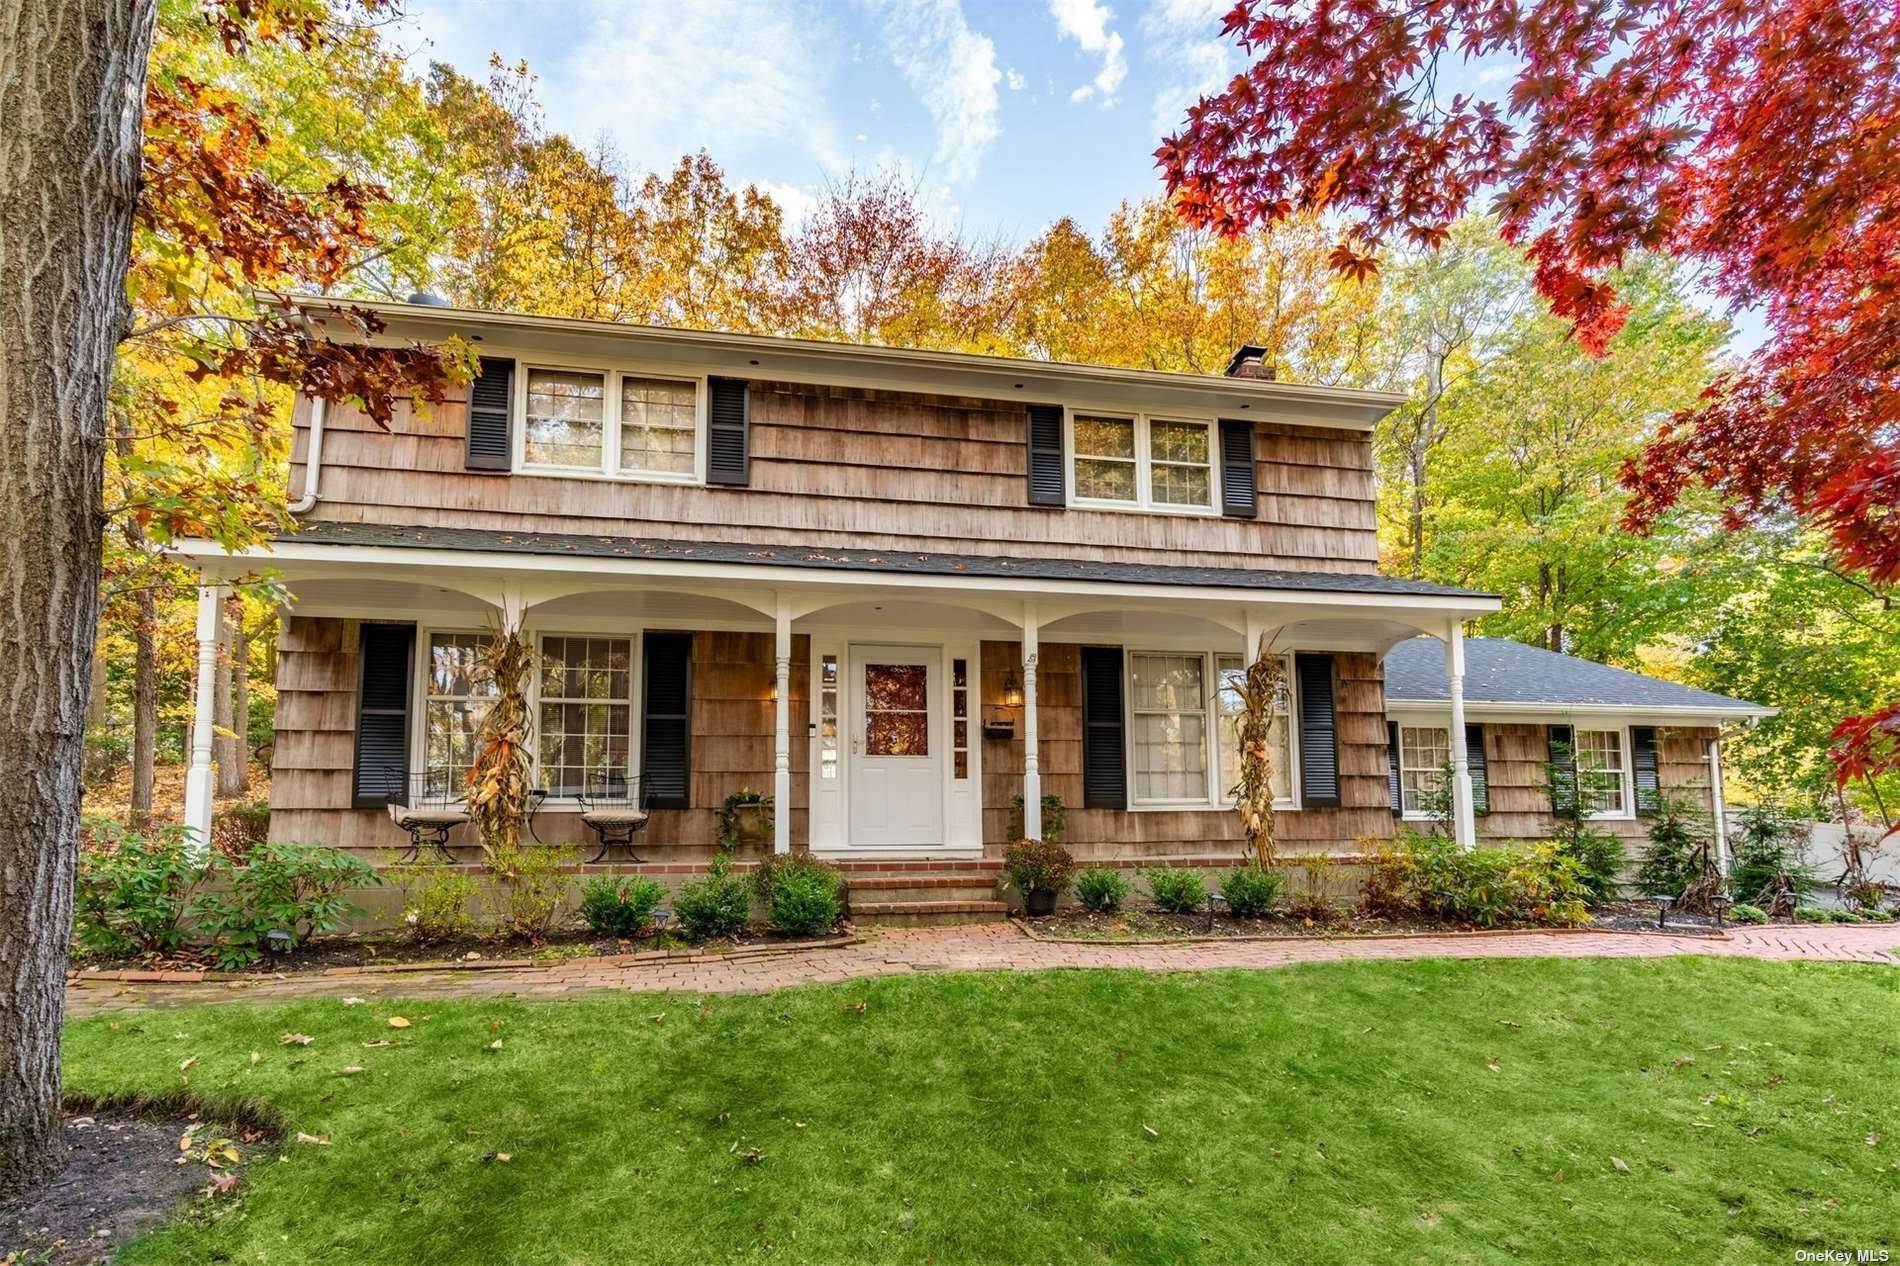 Imagine living in this 4 bedroom 3 full bath custom renovated Colonial home with winter water views and a walk distance to Port Jefferson Village.